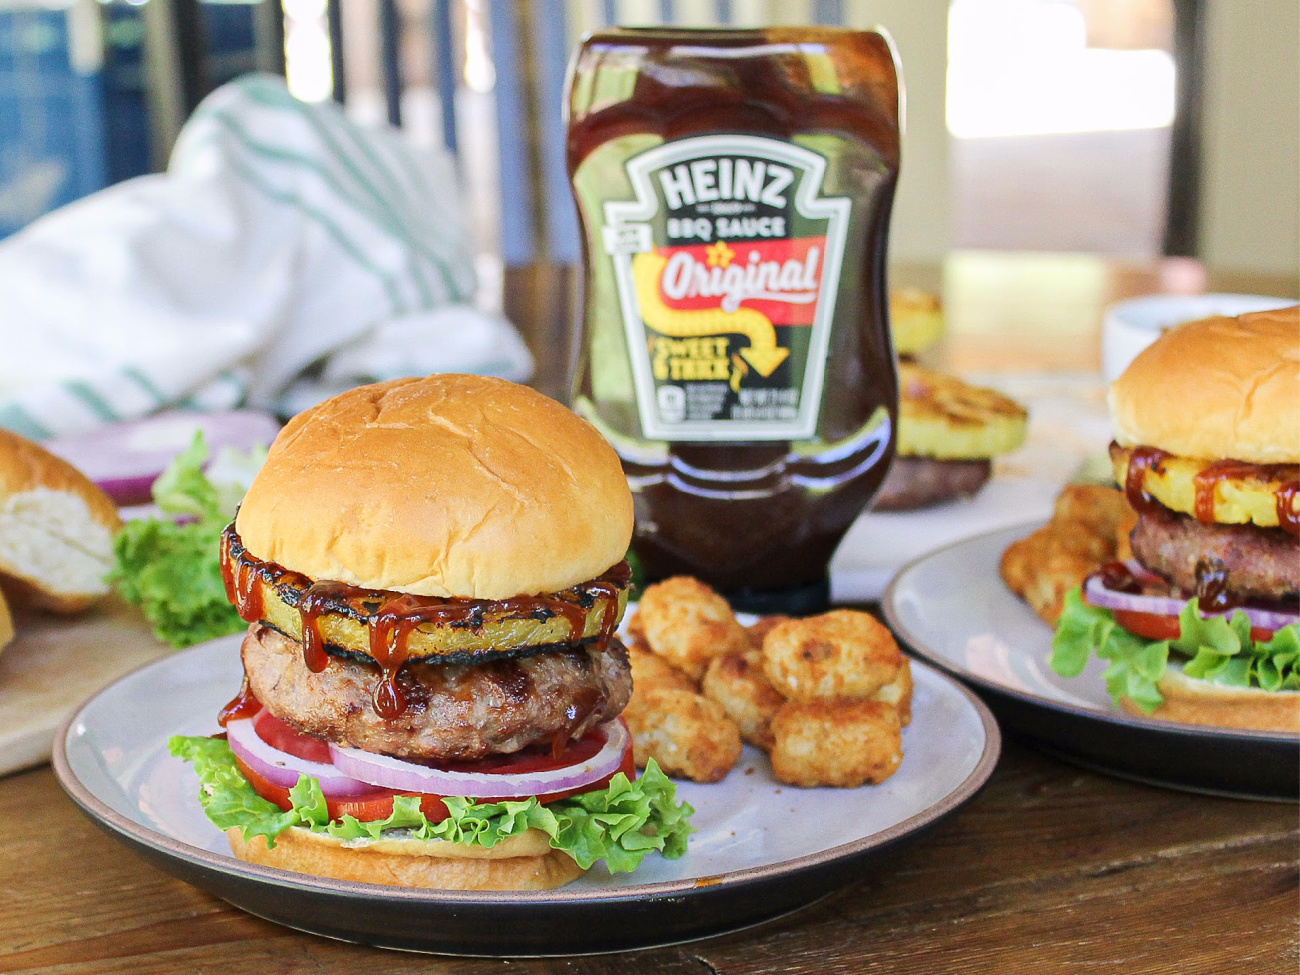 Escape From The Ordinary With These Hawaiian Turkey Burgers – Be Sure To Enter The Heinz Art Of The Burger Contest